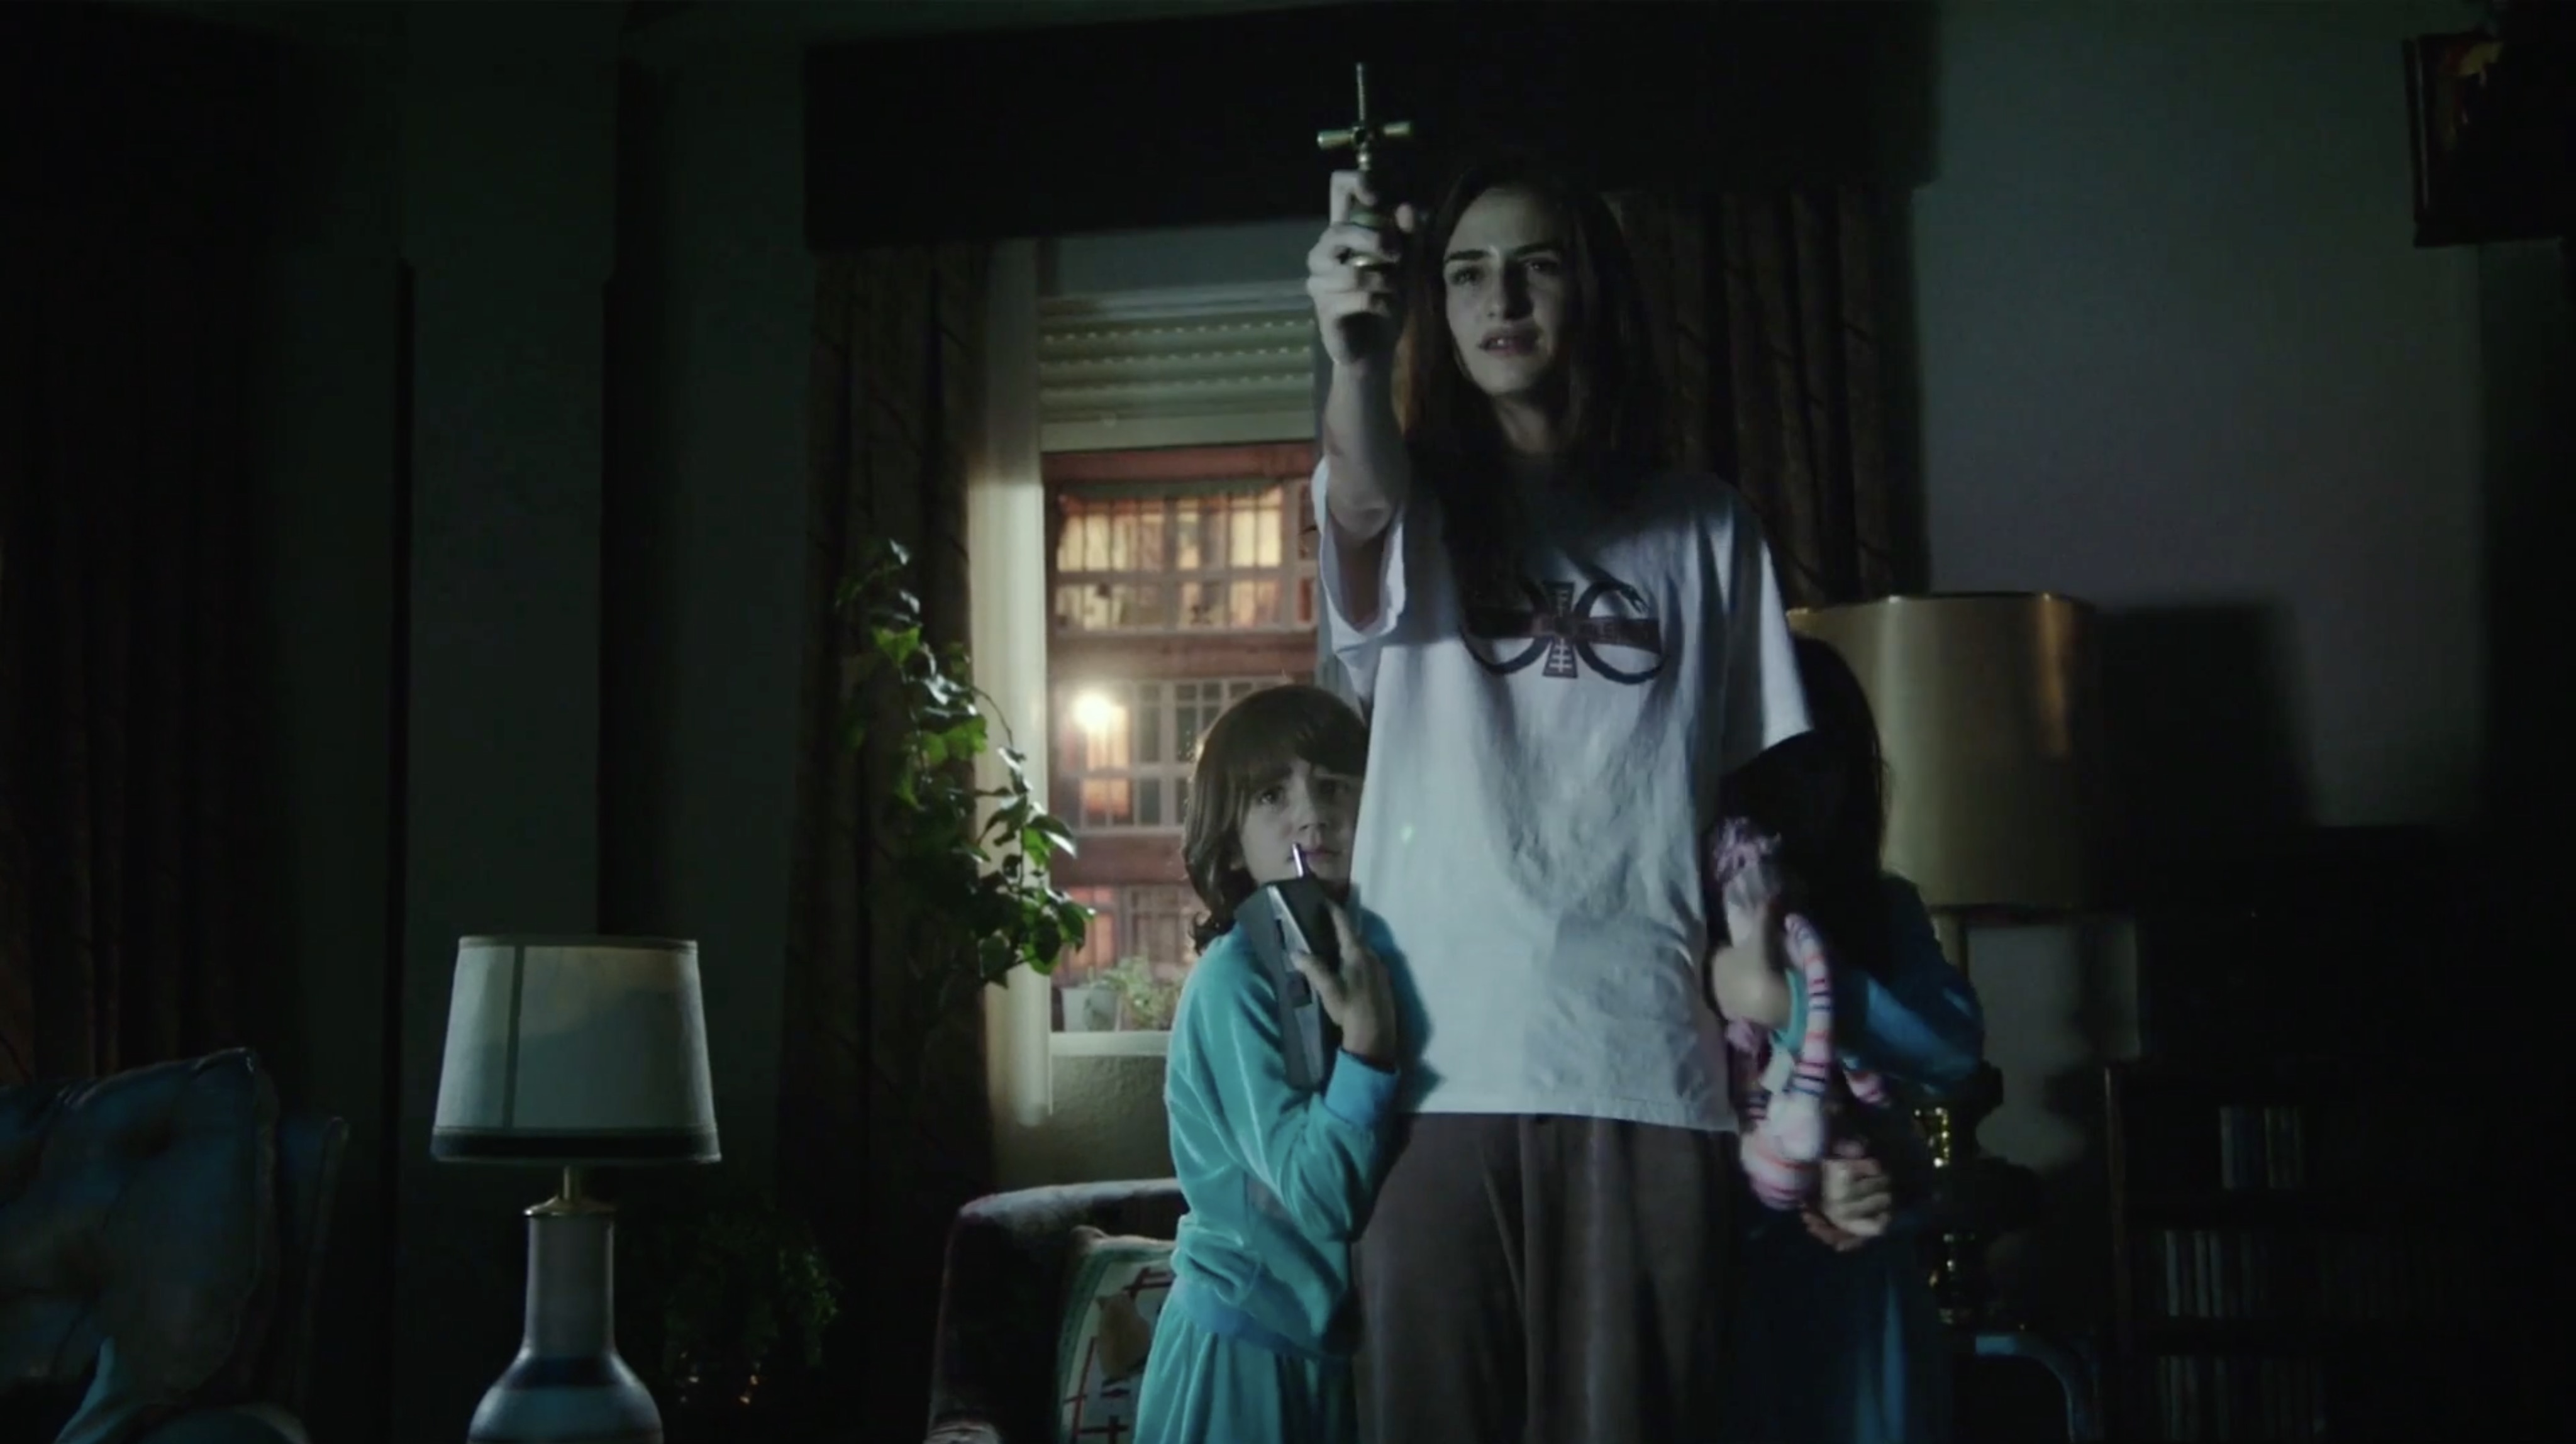 Veronica (Sandra Escacena) (c) holds up a crucifix to ward off evil while protecting her sisters Bruna Gonzalez (l) and Claudia Placer (r) in Veronica (2017)